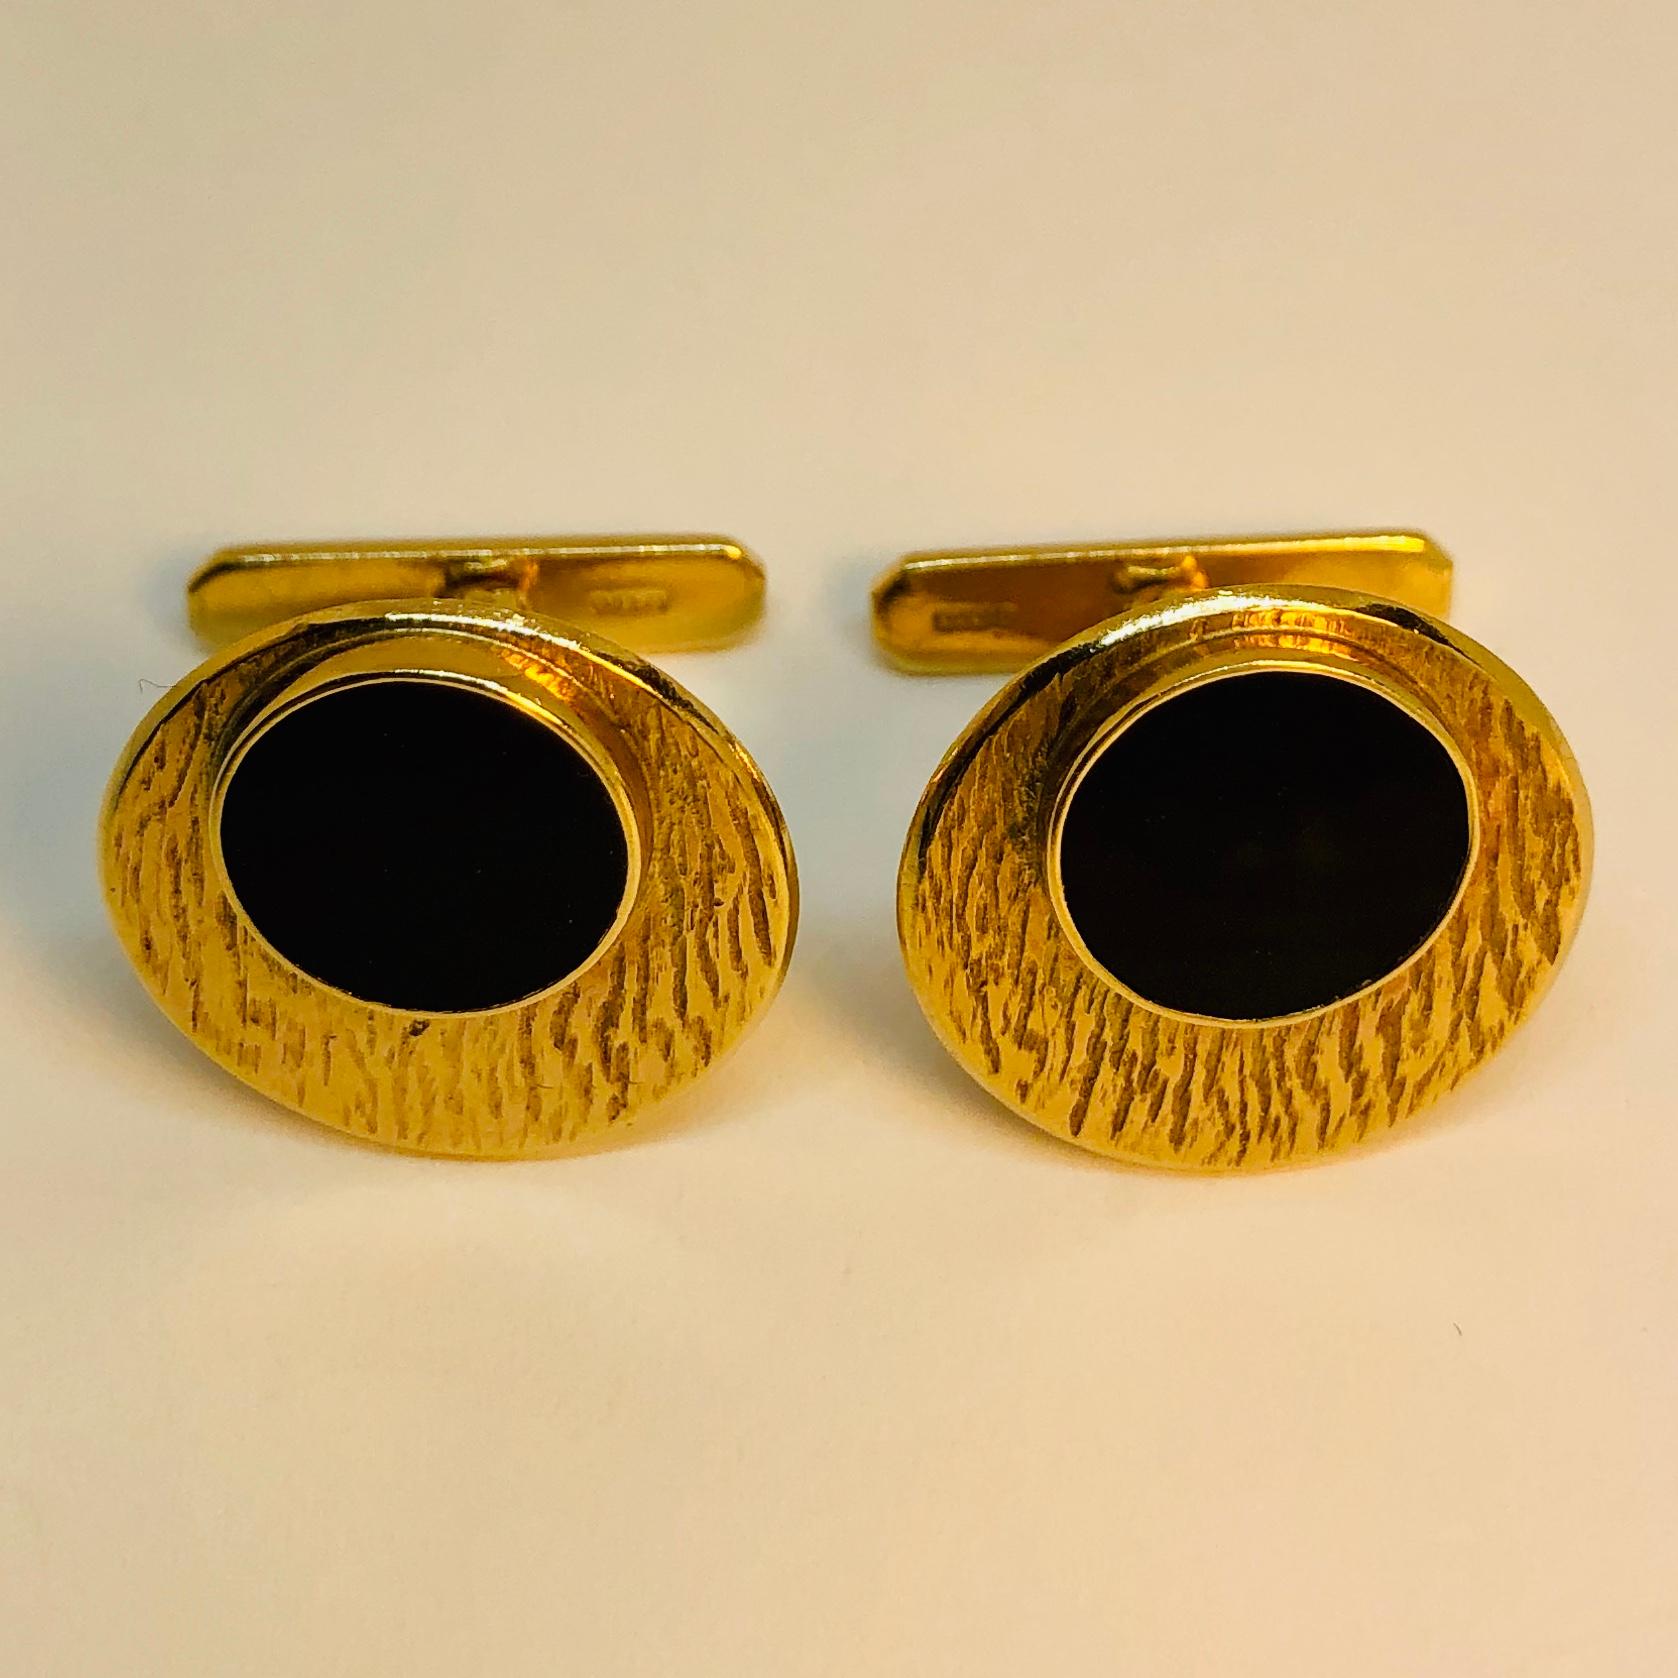 Onyx and textured gold disc shaped Swilink cuff links with bi folding design feature. Modernist style. Marks for 9k gold.